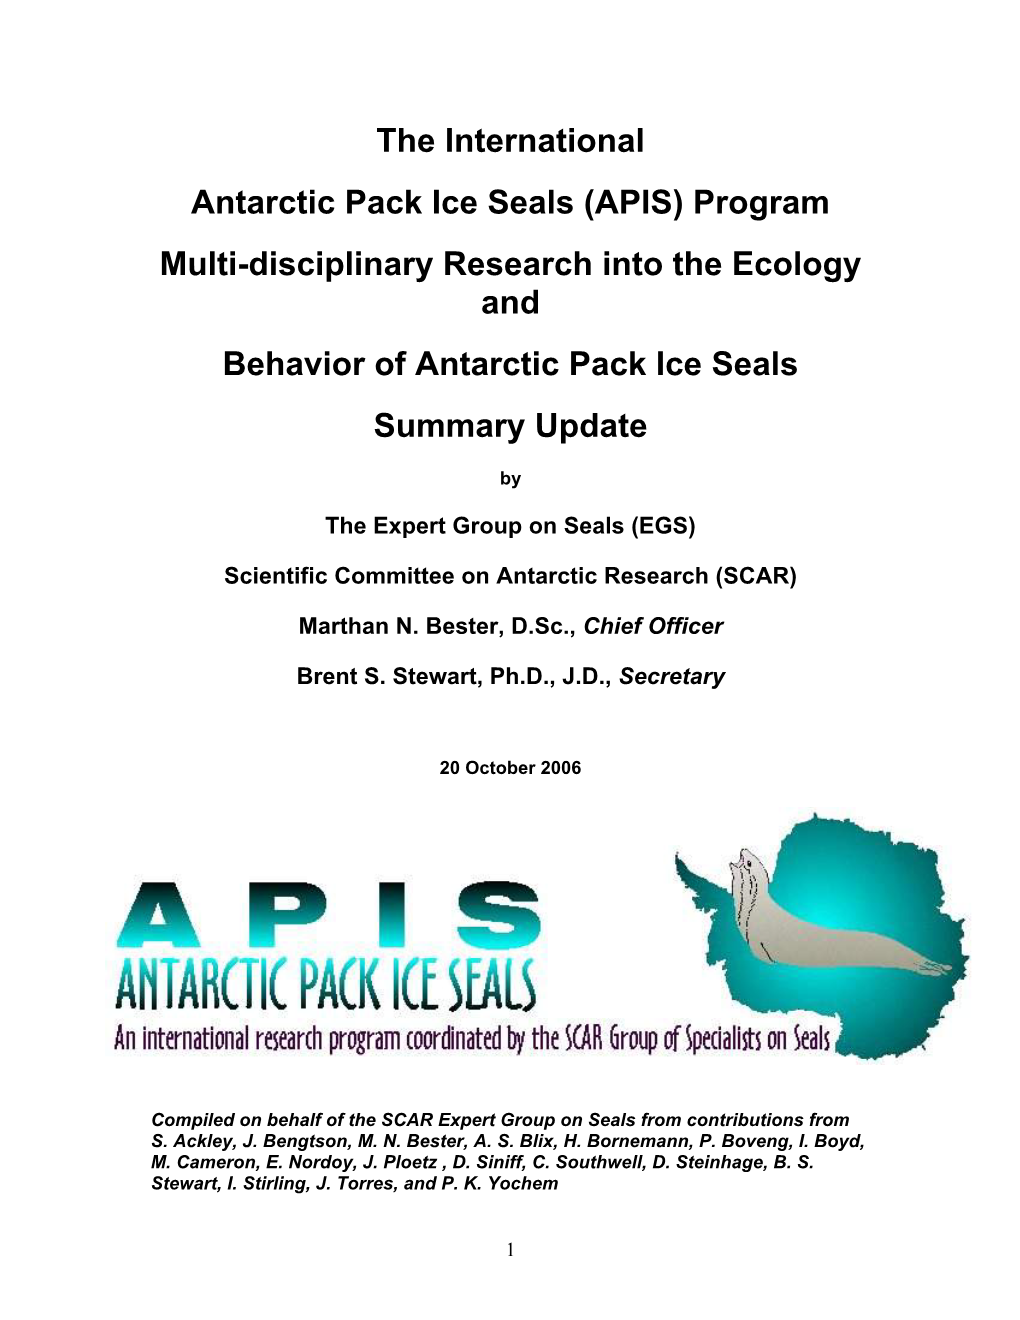 The International Antarctic Pack Ice Seals (APIS) Program Multi-Disciplinary Research Into the Ecology and Behavior of Antarctic Pack Ice Seals Summary Update